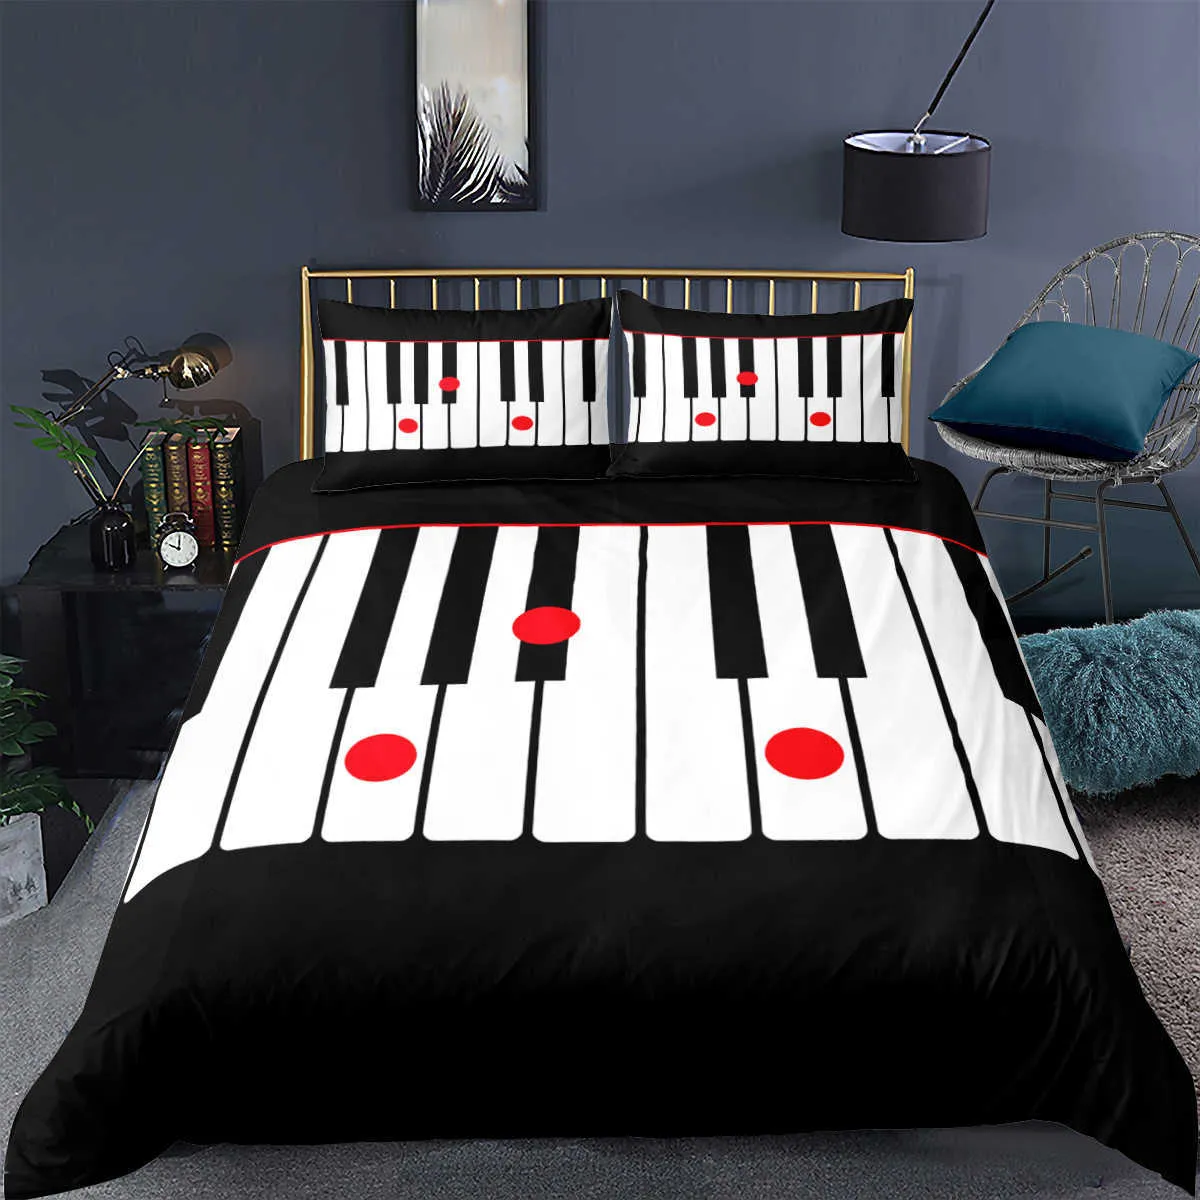 Piano Music Note Printed Bedding Set 3D Luxury Bed Set Comforters Adults Kids Duvet Cover Pillowcase Twin Queen King size H09132939813